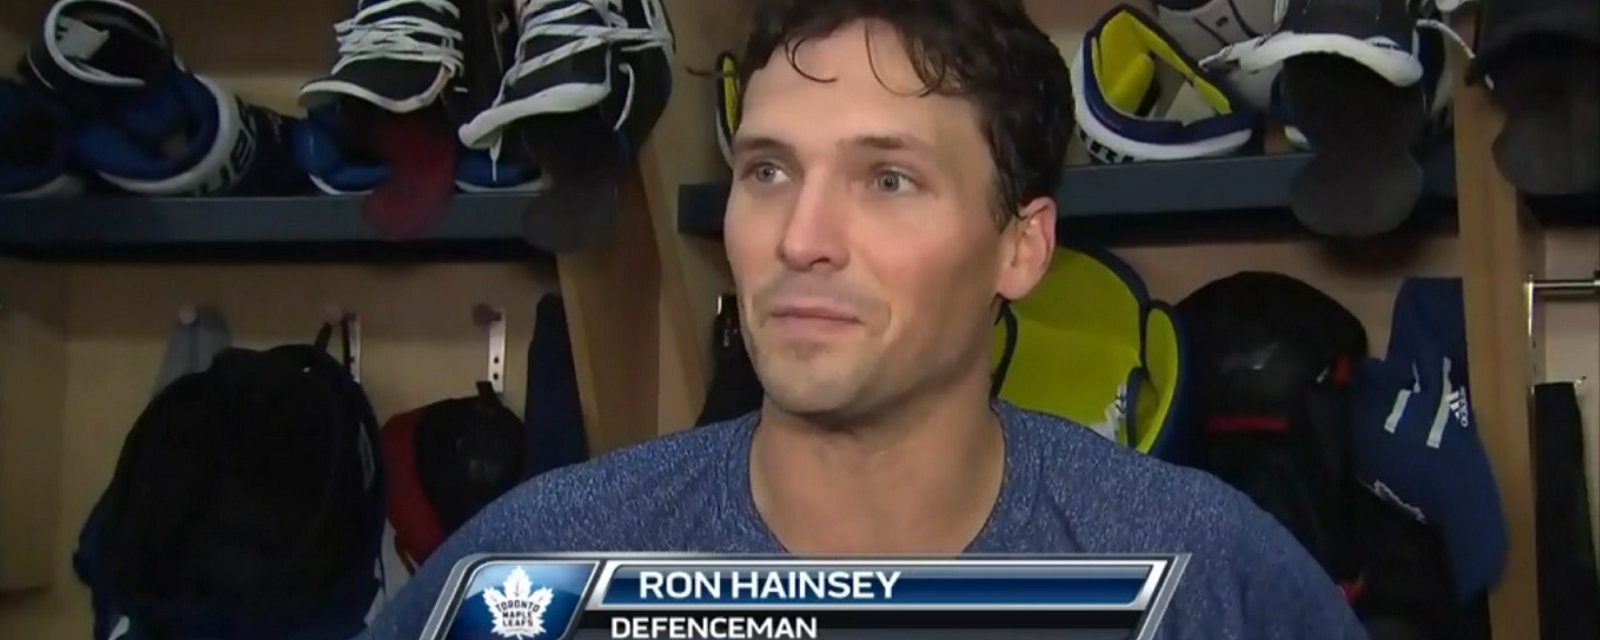 Toronto's Ron Hainsey gives perfect response to questions about the anthem.